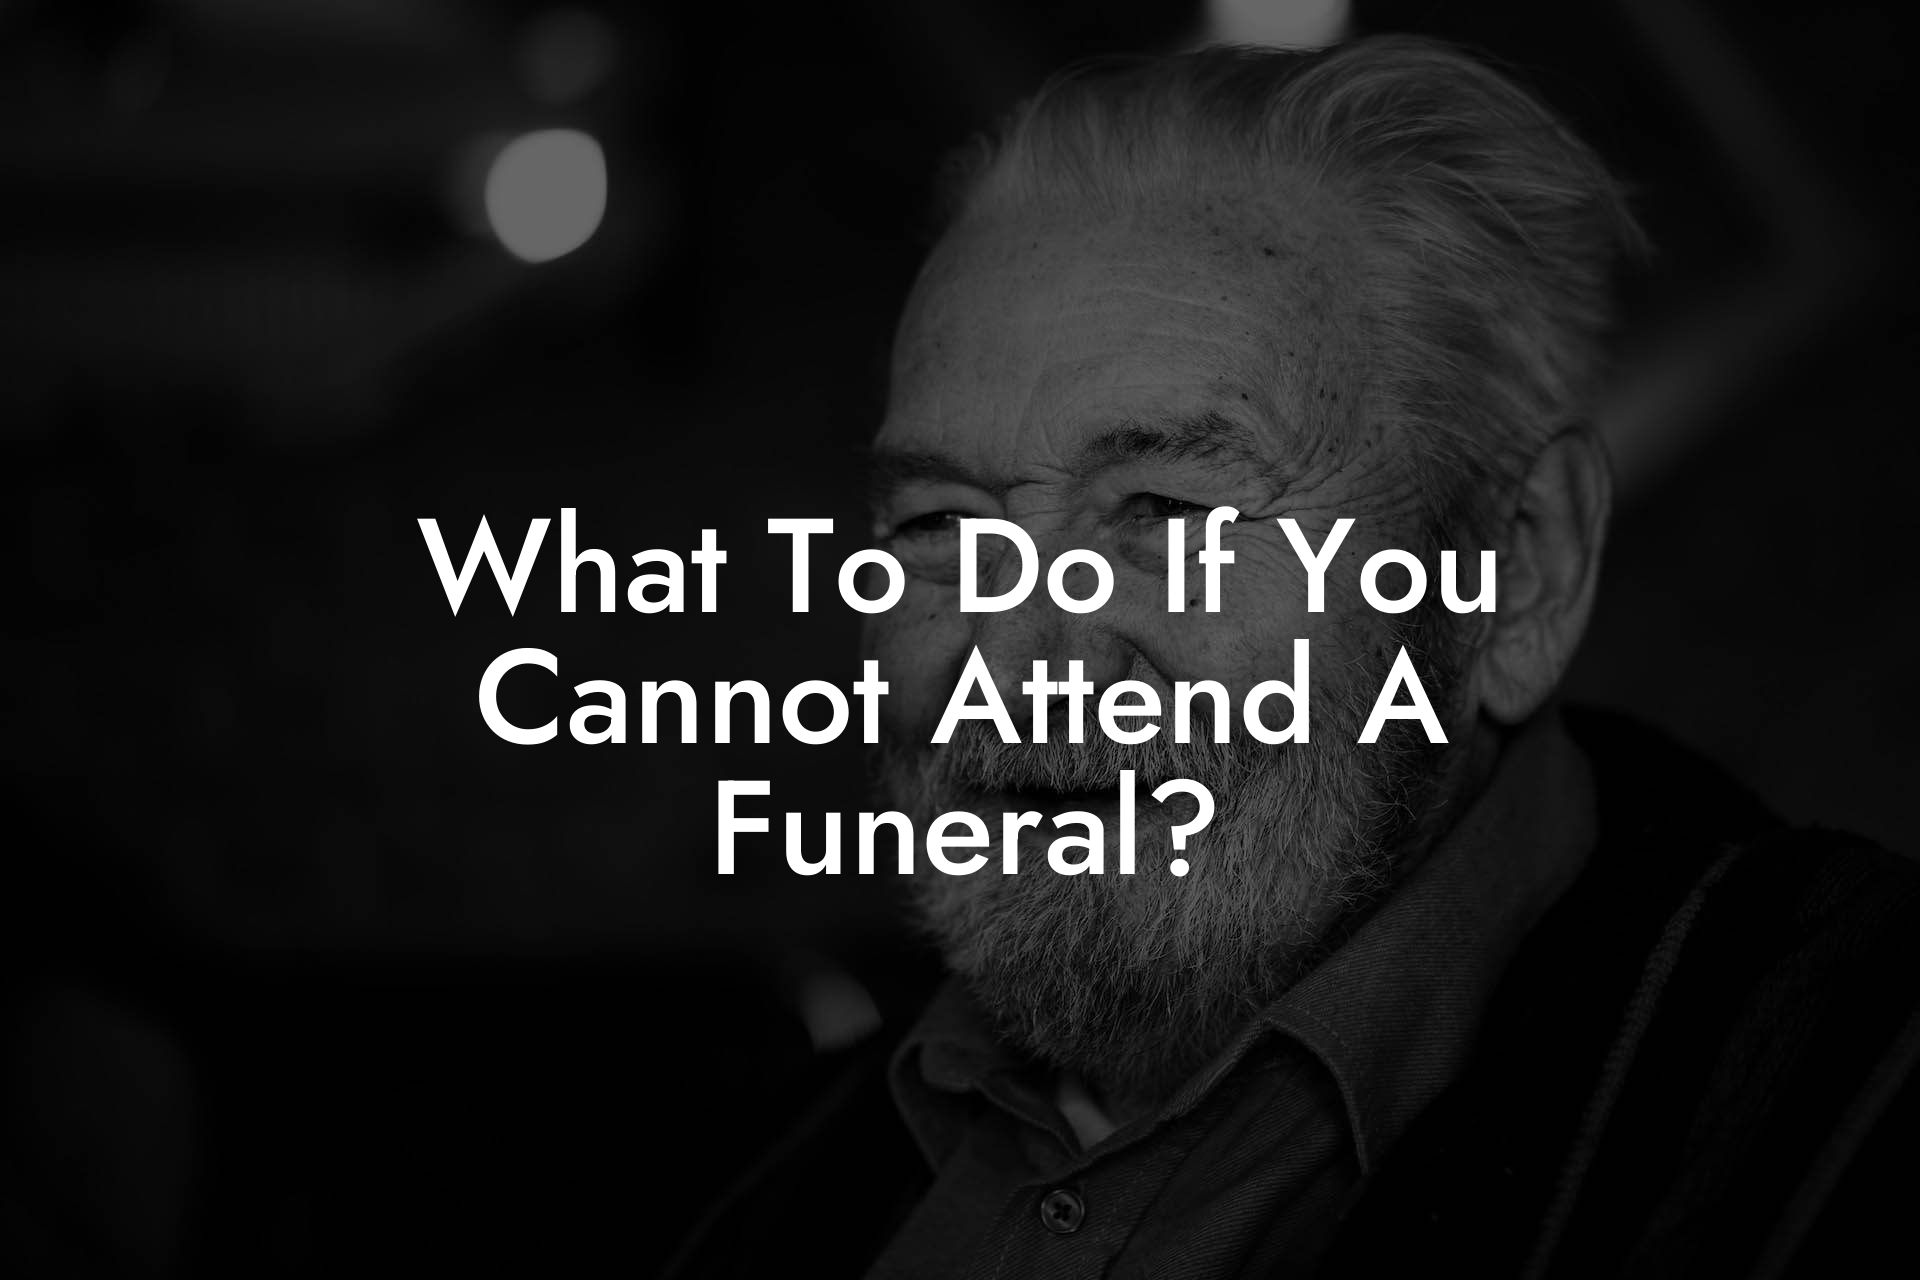 What To Do If You Cannot Attend A Funeral?